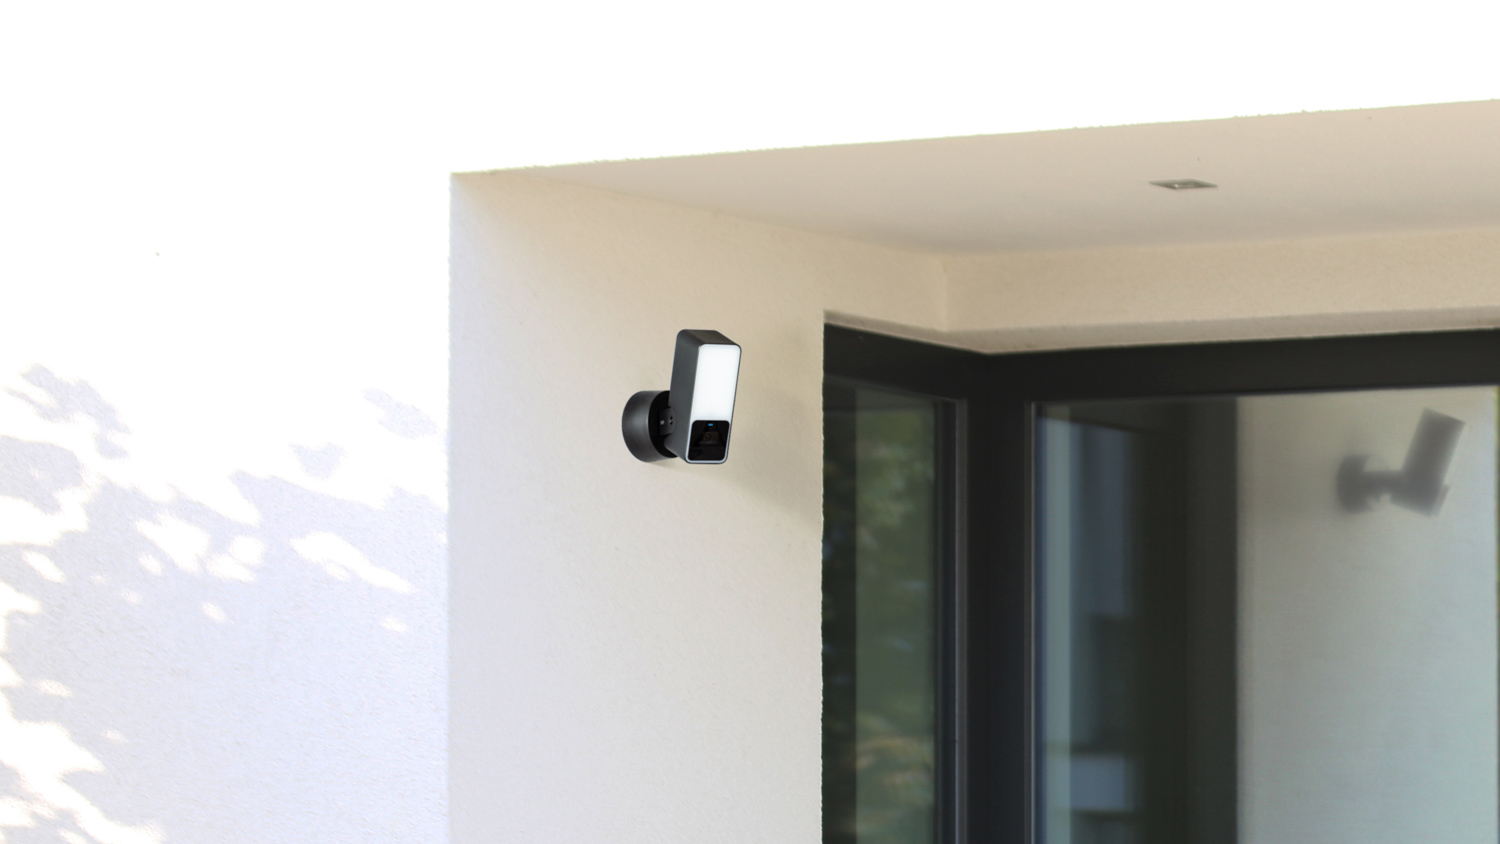 CES 2022: The Eve Outdoor Cam supports HomeKit Secure Video and has a floodlight thumbnail